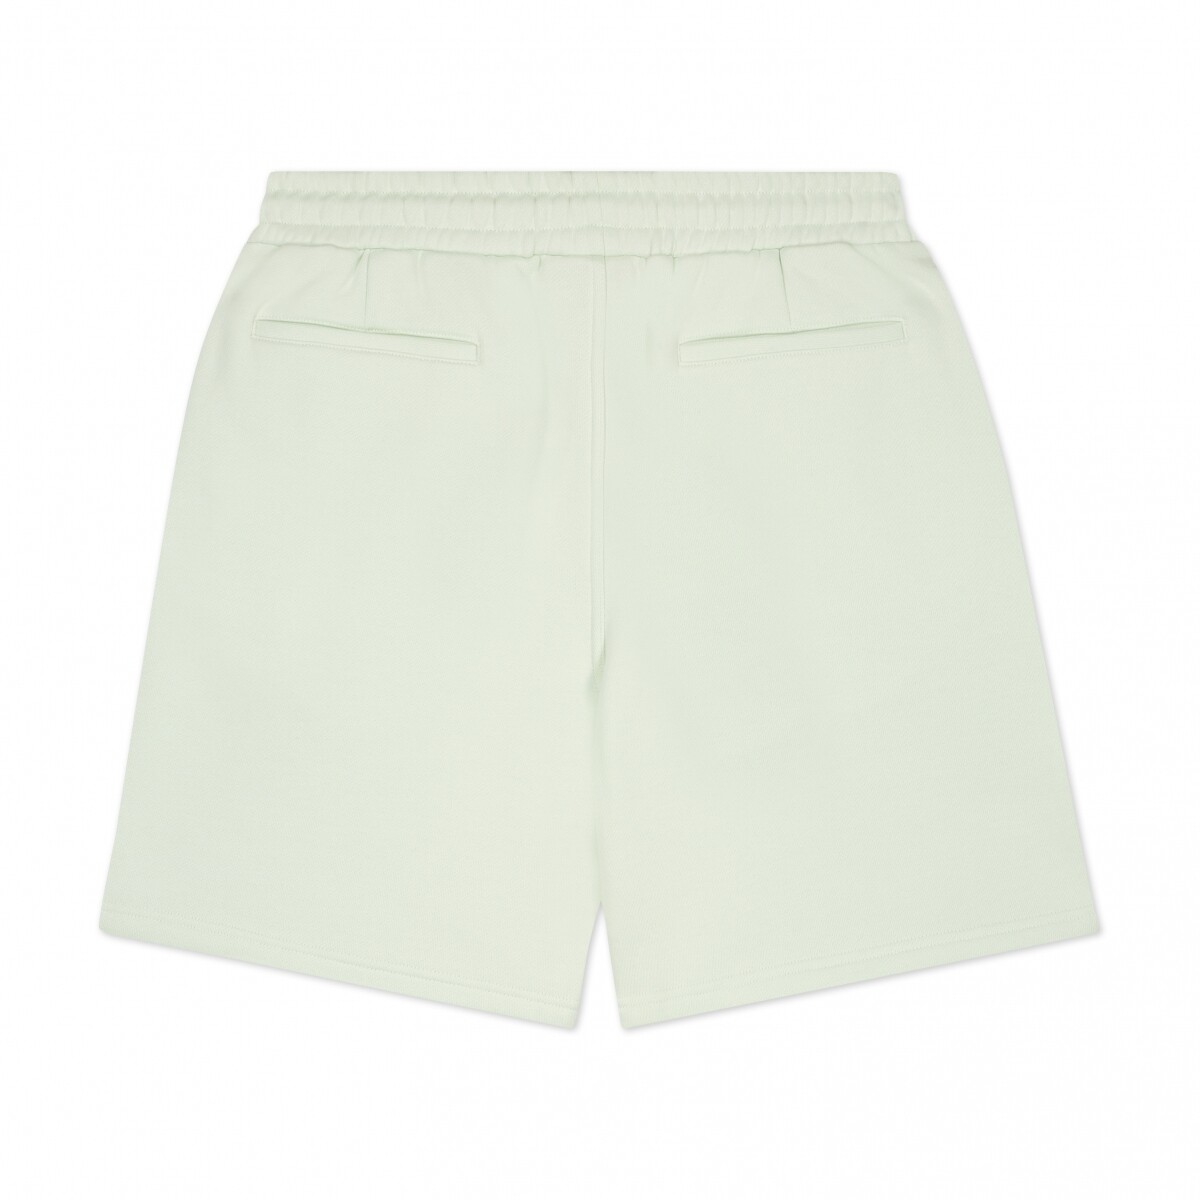 Nevy Short Clearly mint